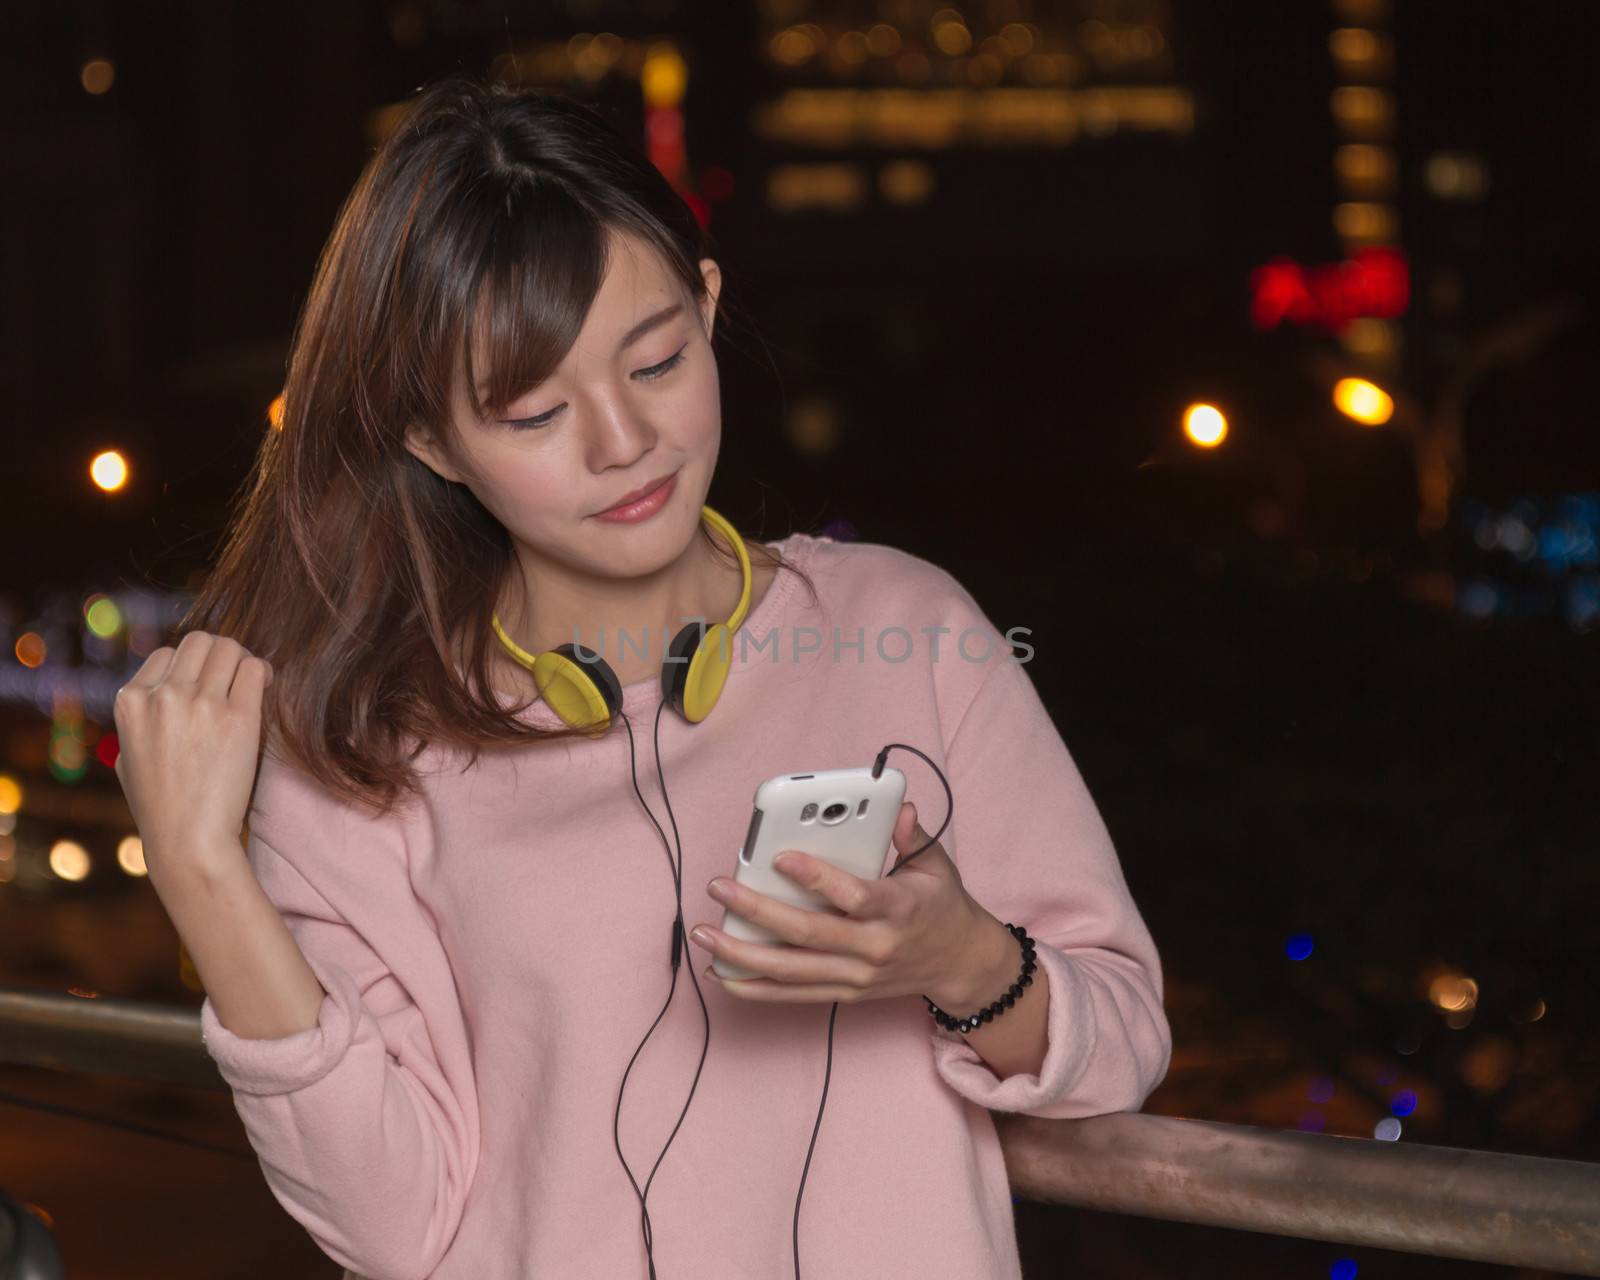 Beautiful Asian woman with smart phone and yellow headphones  by imagesbykenny